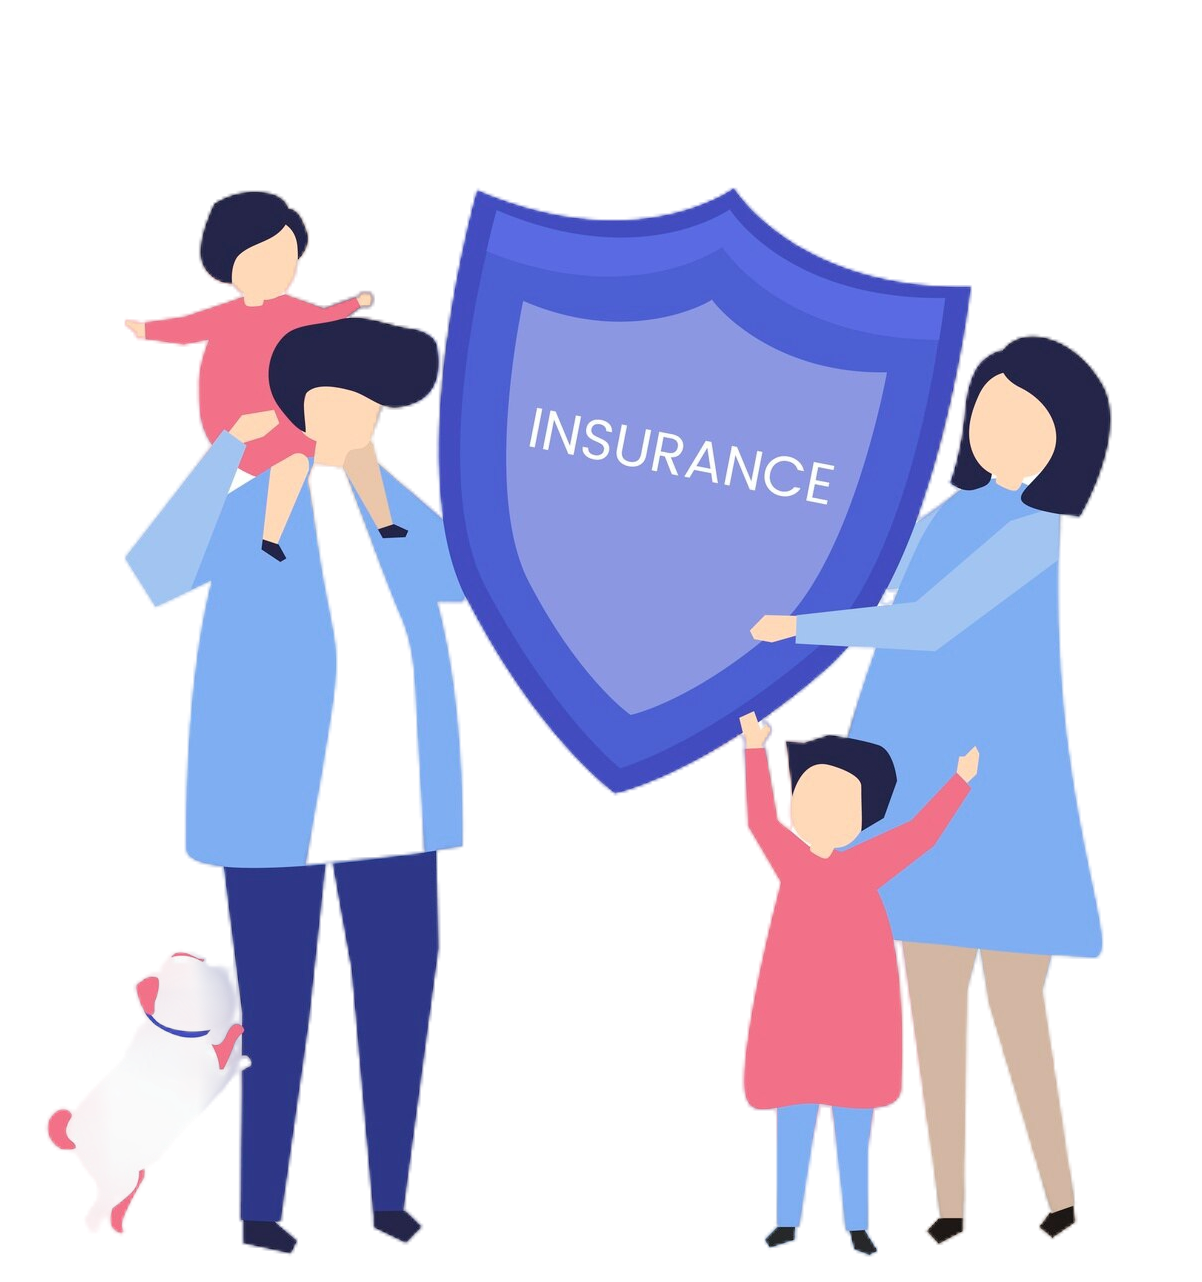 Insurance Management with HeyDoc AI's WellnessGPT